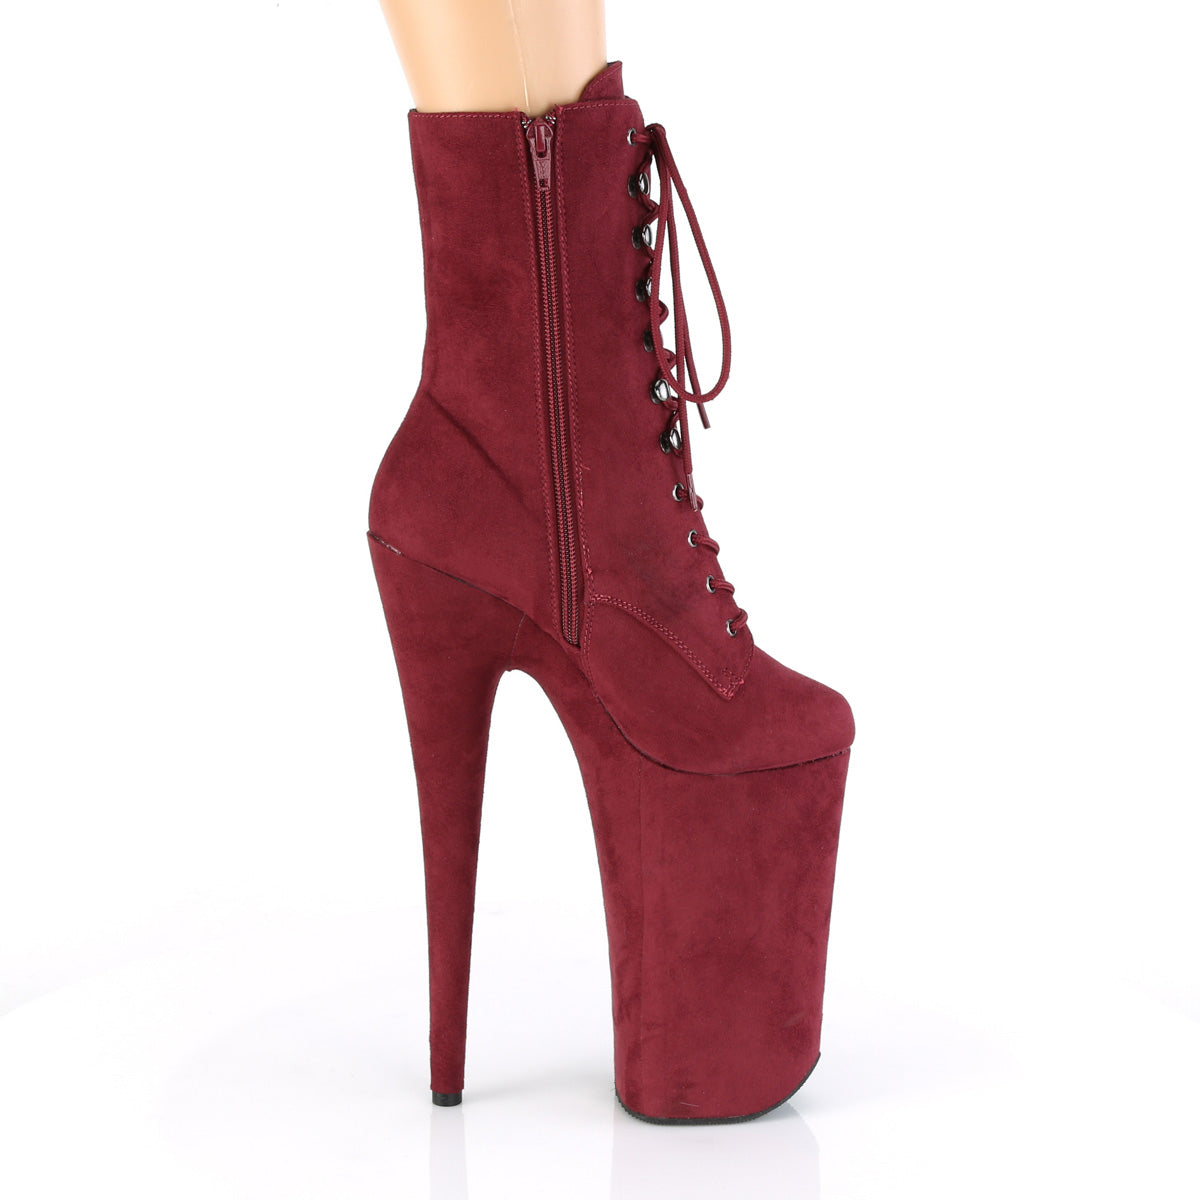 Pleaser Womens Ankle Boots BEYOND-1020FS Burgundy F.Suede/Burgundy F.Suede